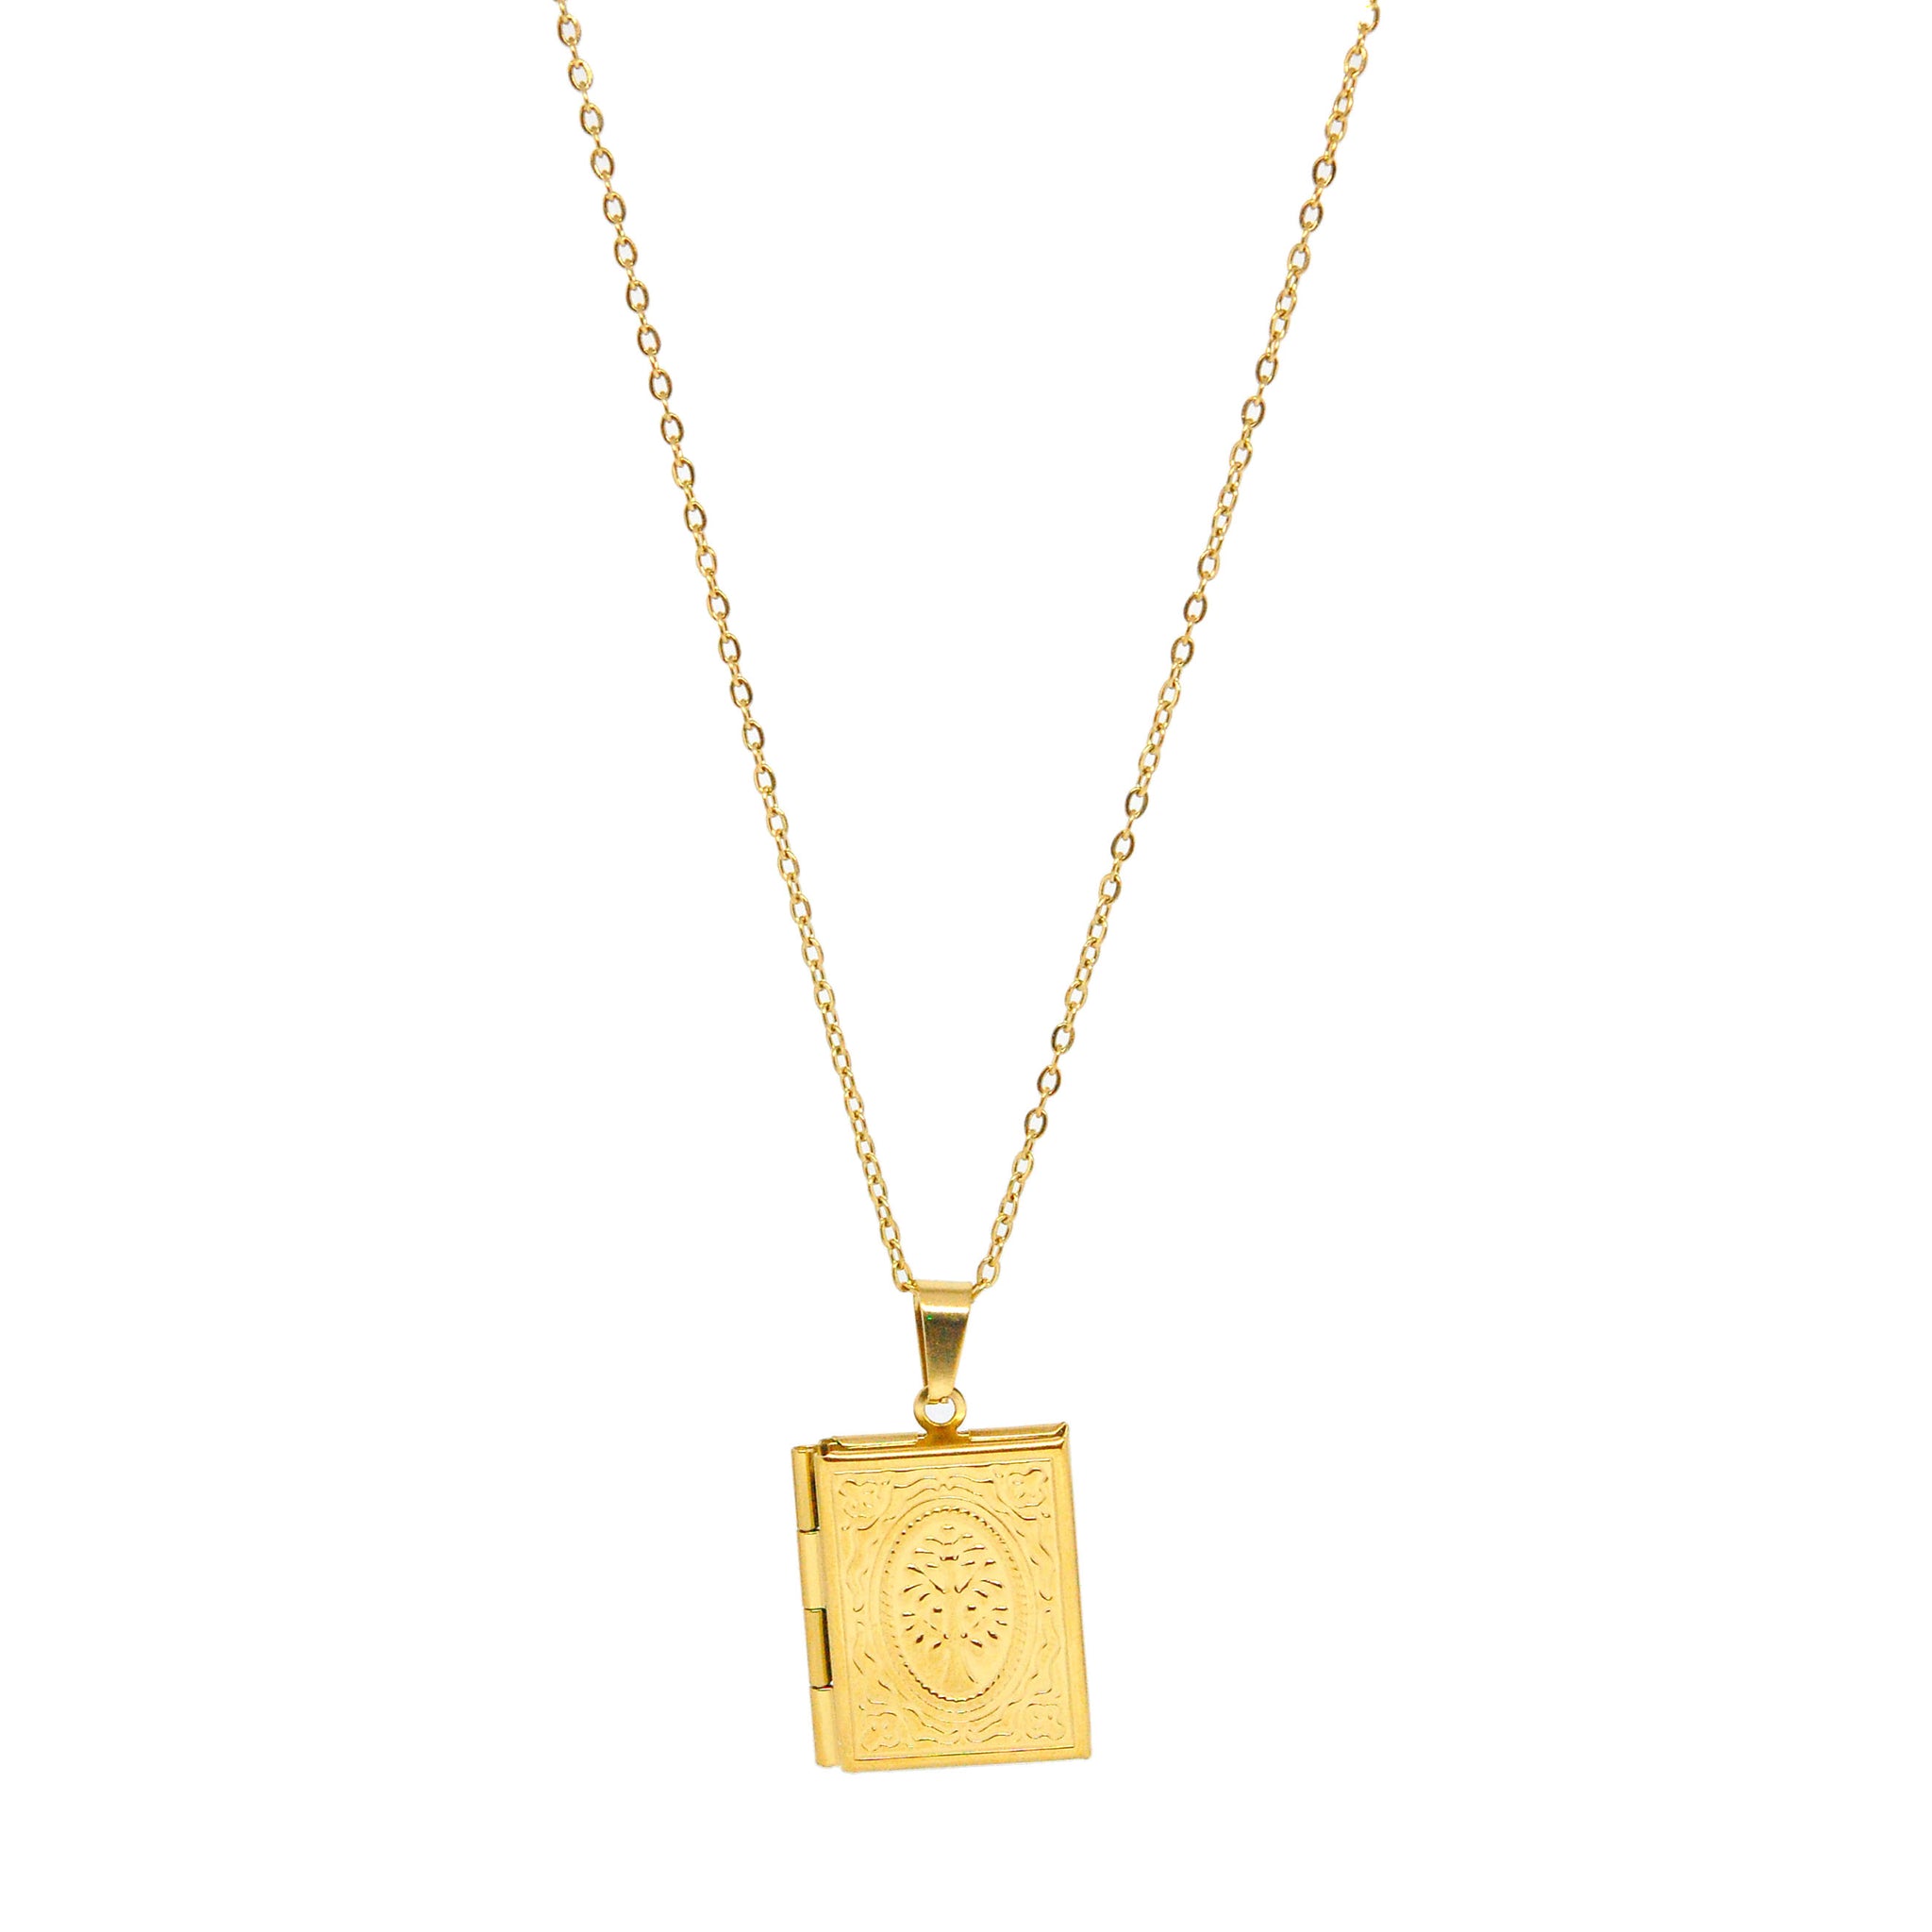 ESN 7630: Gold Plated Open-able "Story of your Life" Locket Necklace